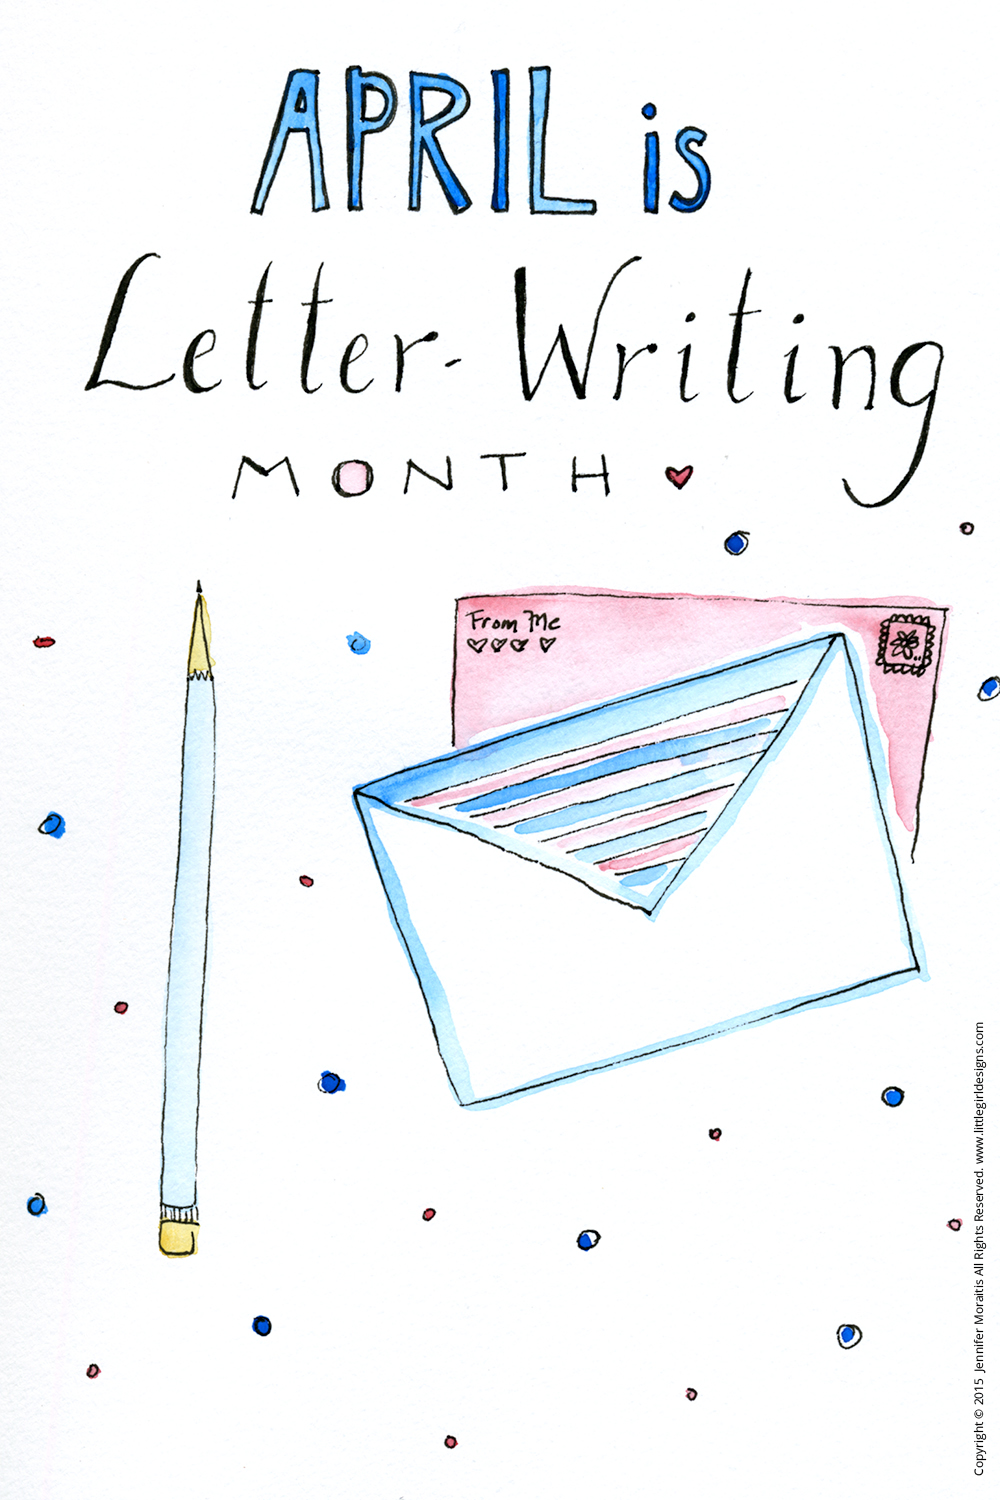 April is Letter Writing Month